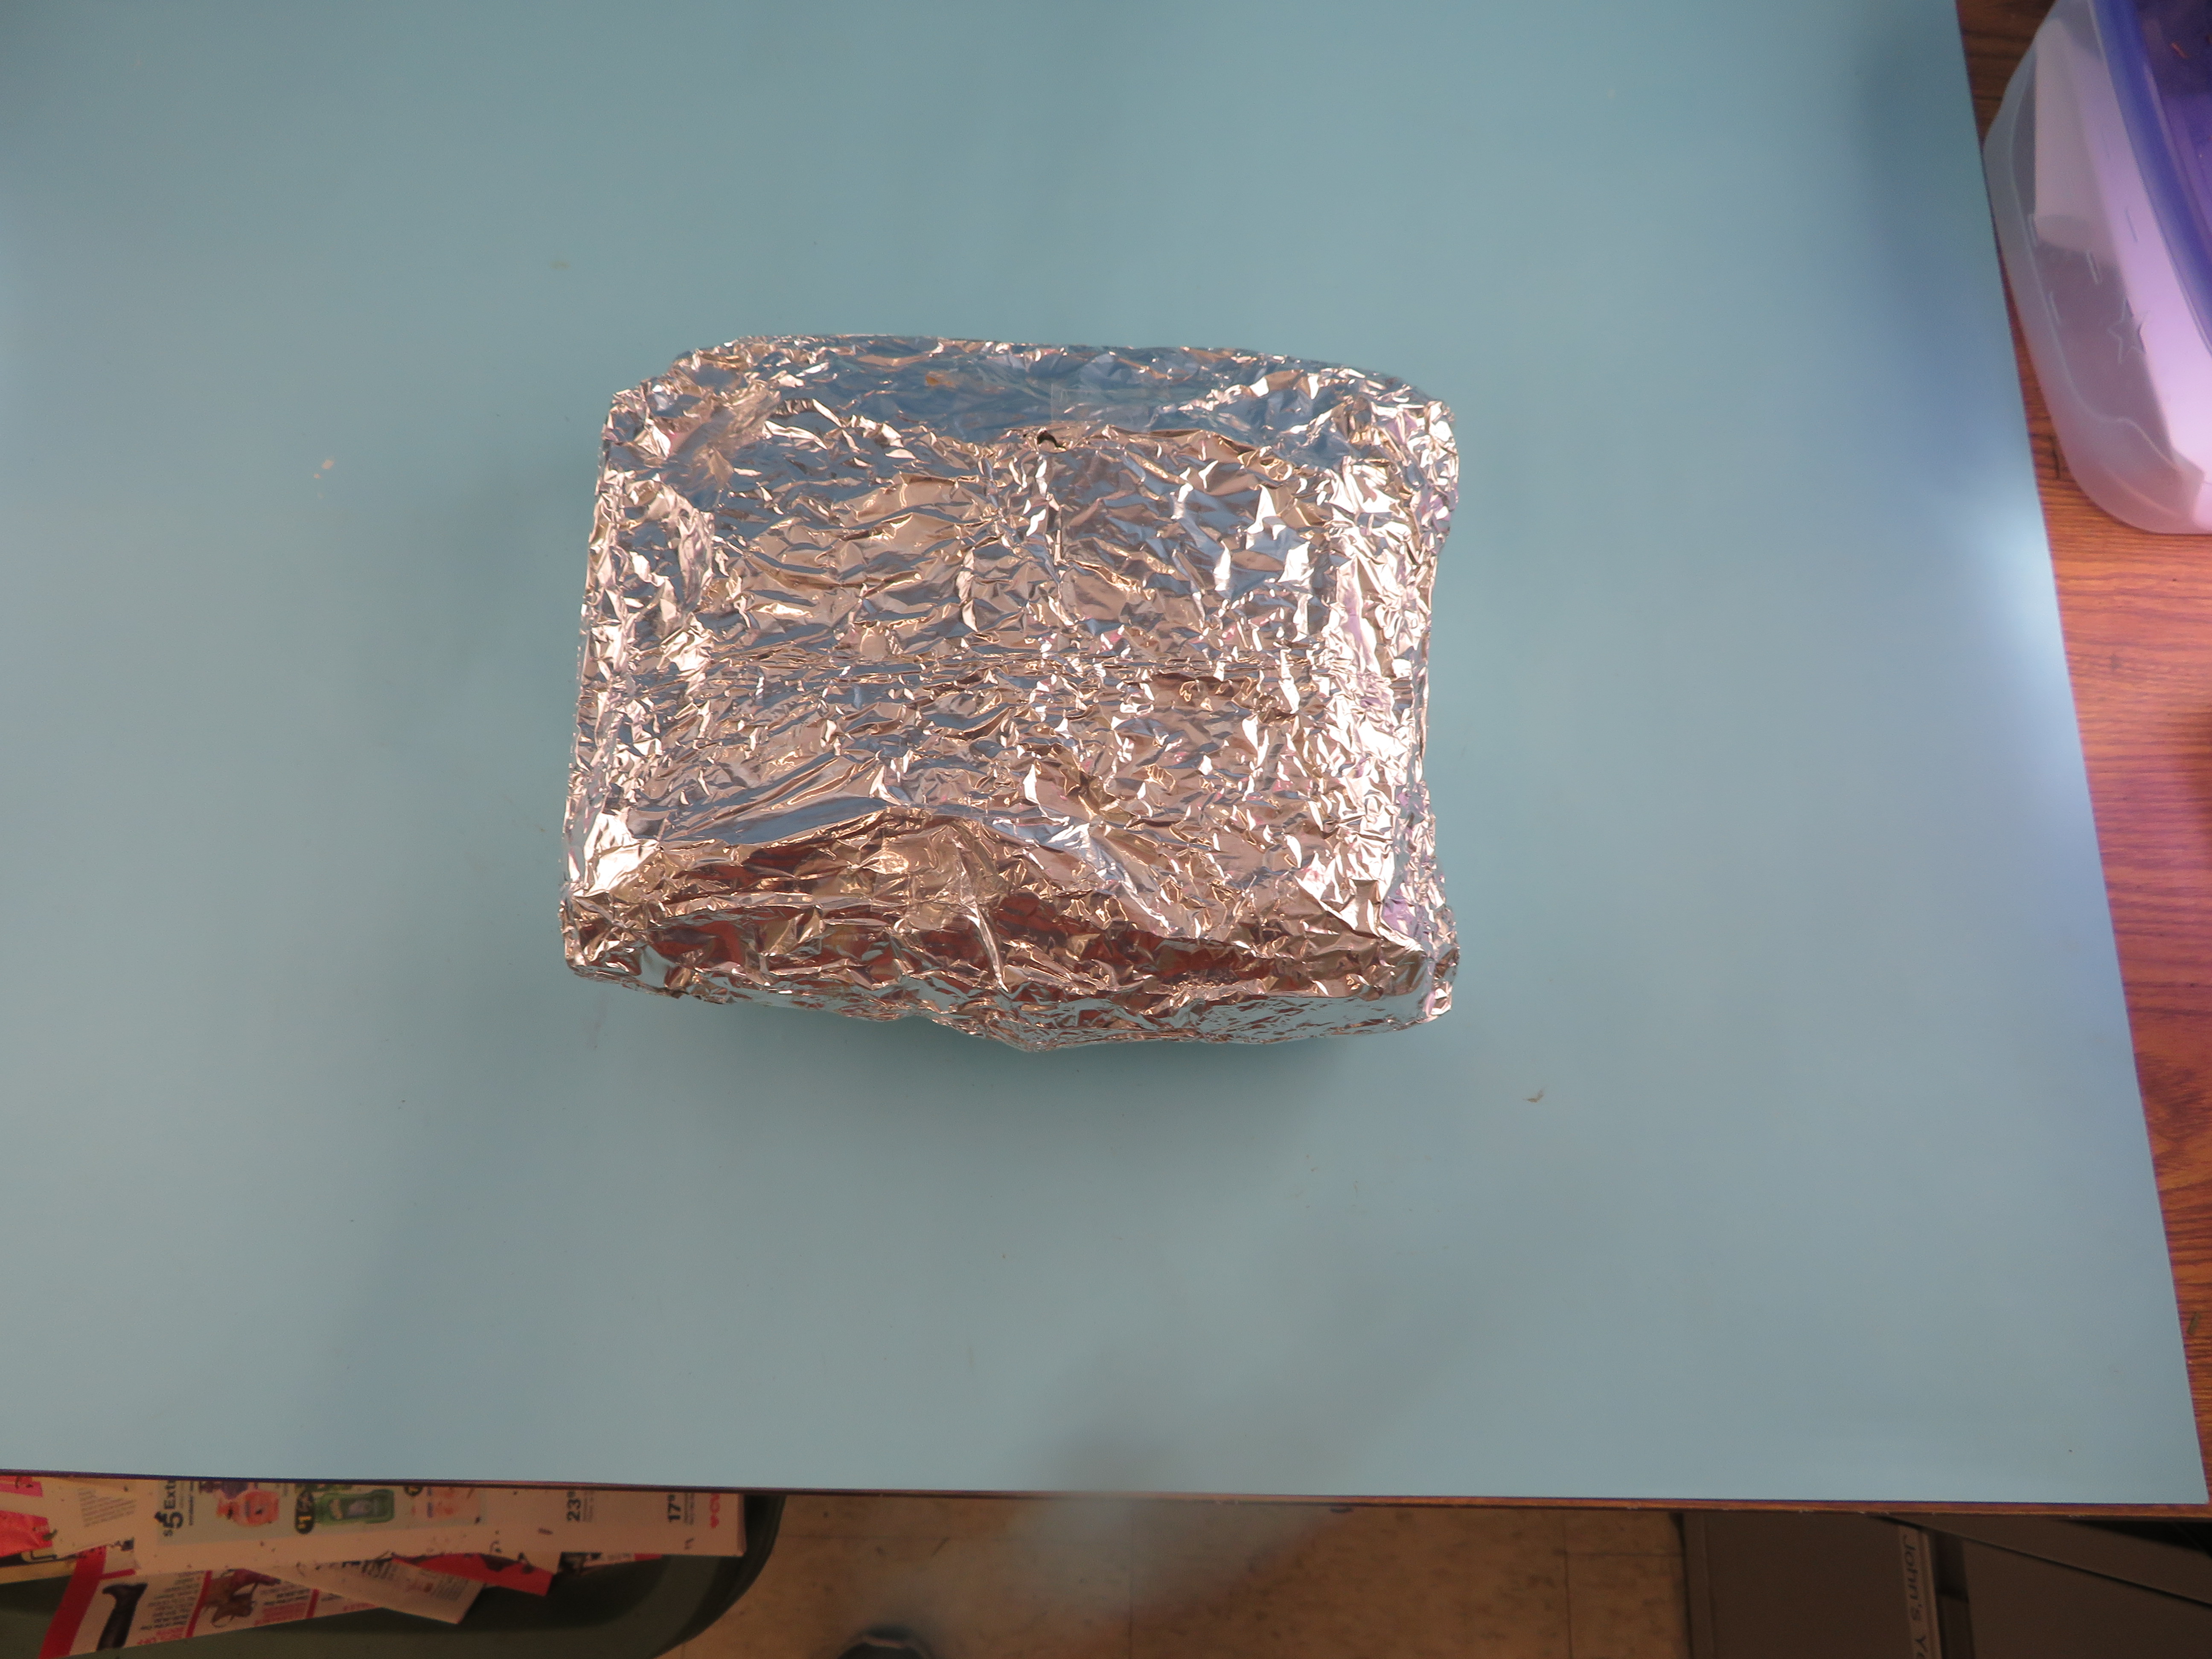 wrapped turf in aluminum